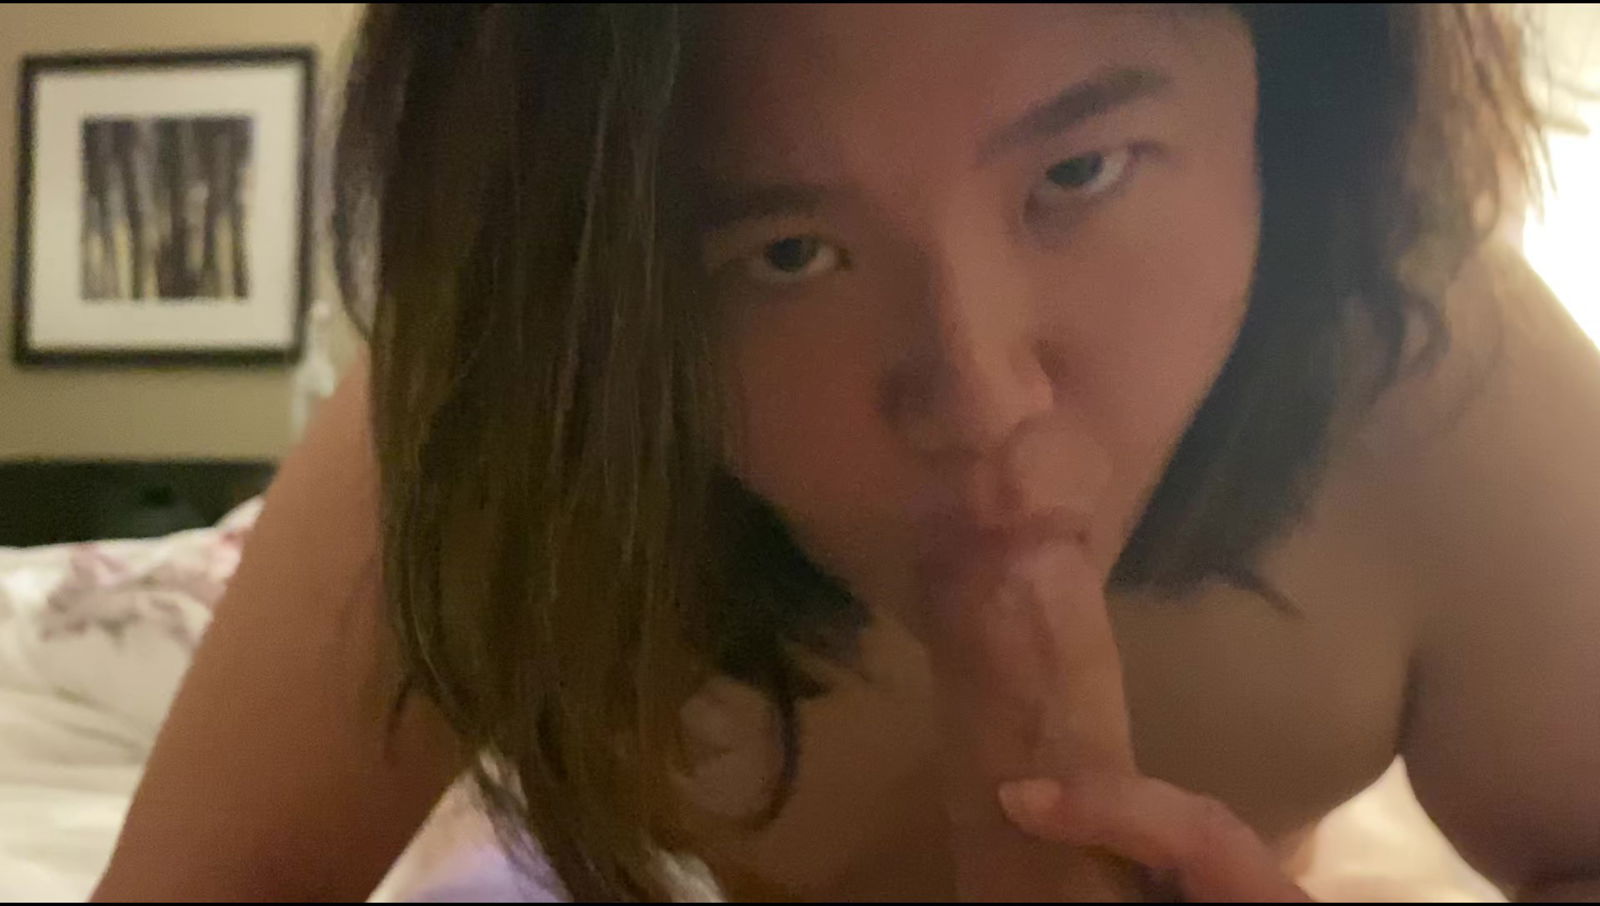 Watch the Photo by HotwifeHusband with the username @psionyx, who is a star user, posted on April 8, 2020. The post is about the topic My Asians. and the text says 'My Asian Hotwife Loves deepthroating a BWC .
Come join us on our website or Pornhub to see our exclusive content. 
Also message us on Kik to chat @ AznHotwifehubs'